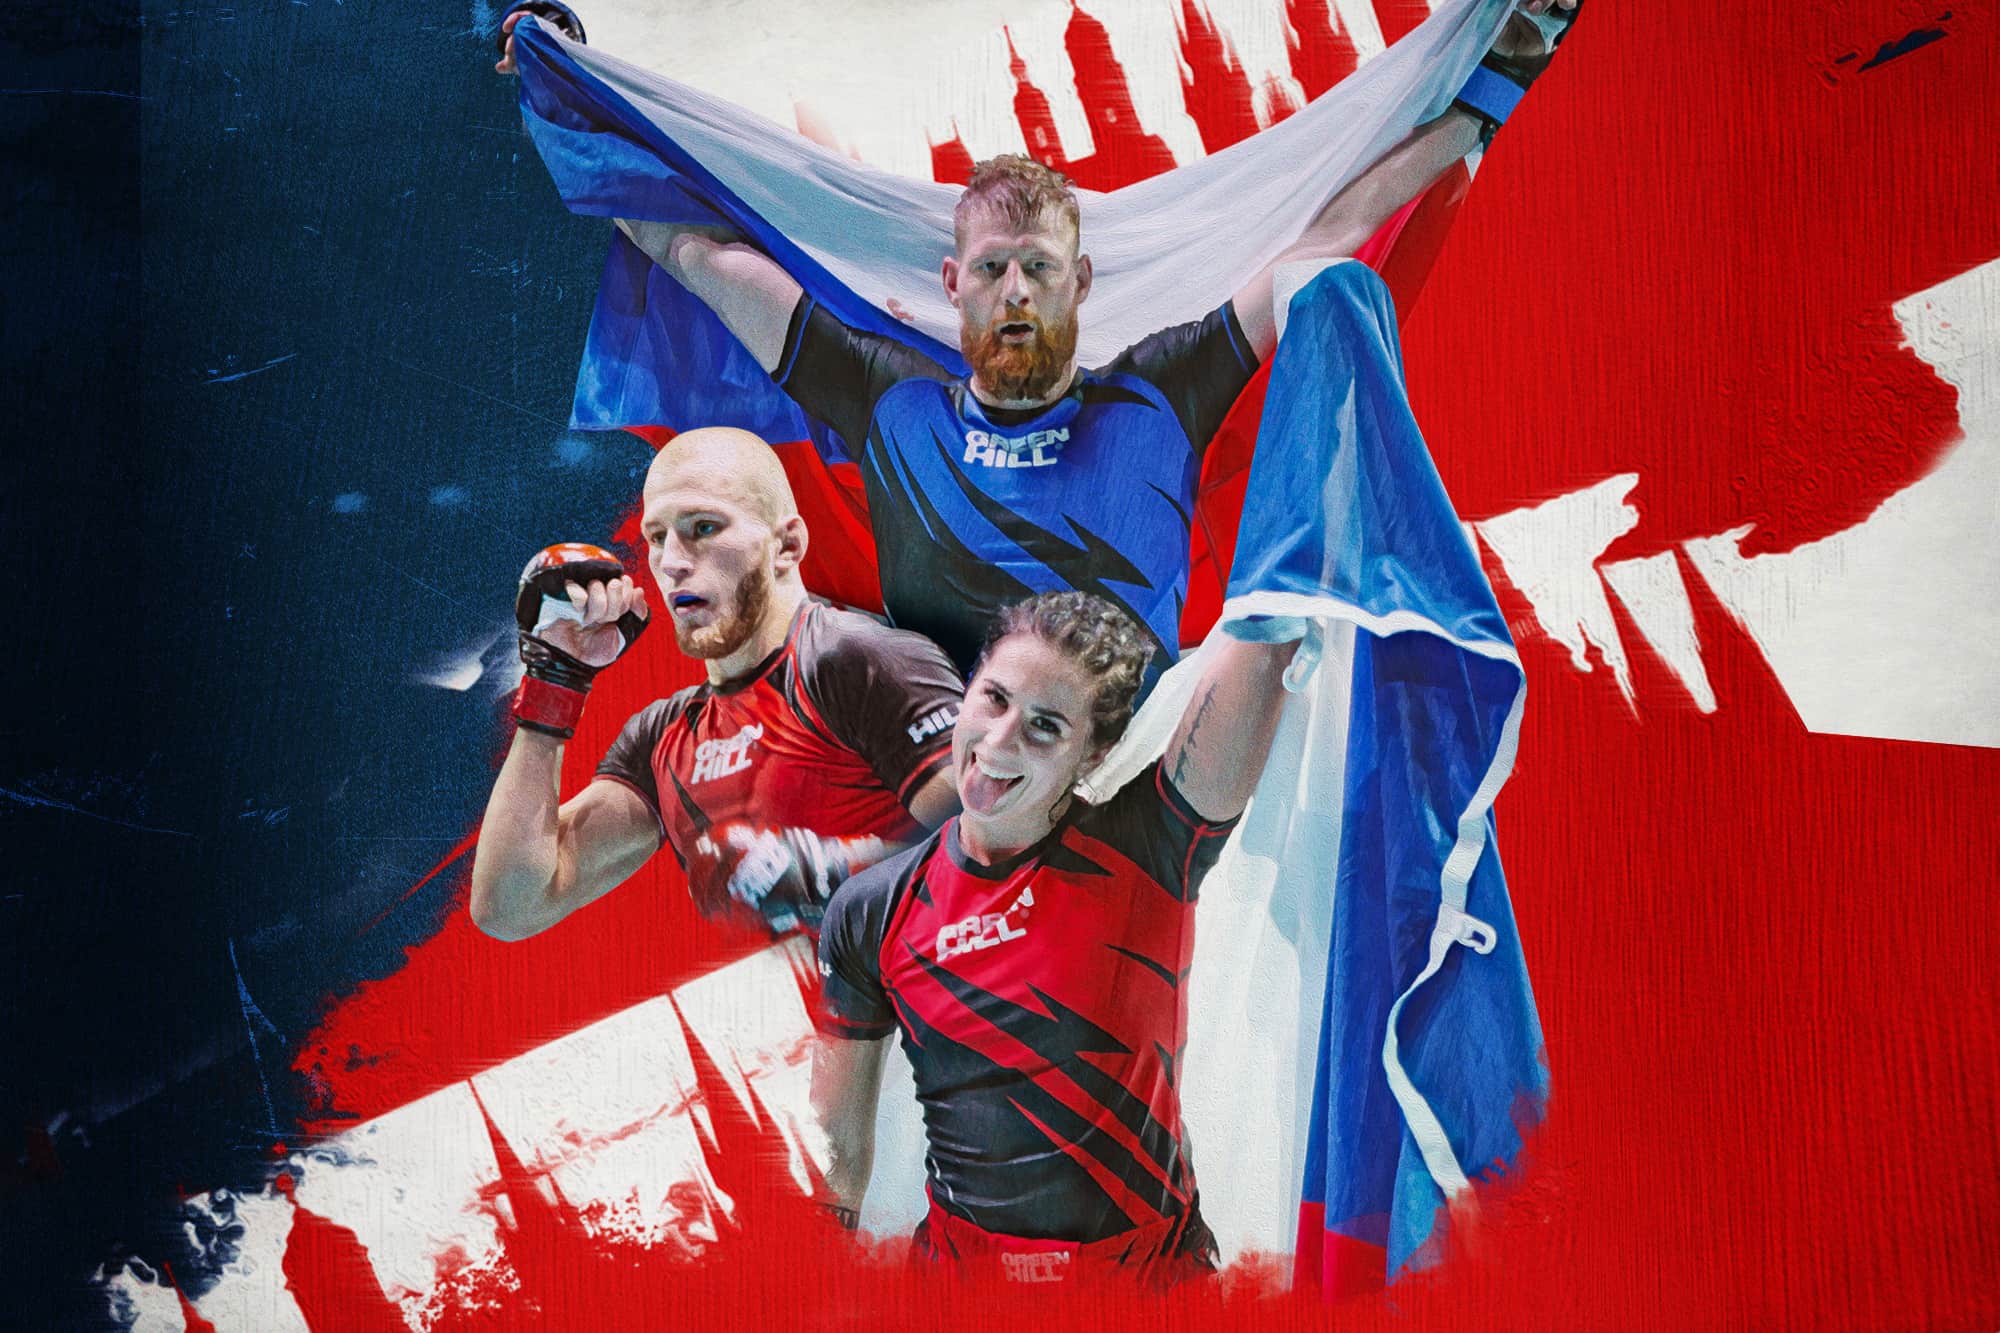 IMMAF MMA World Cup – Prague to stream live at IMMAF.TV